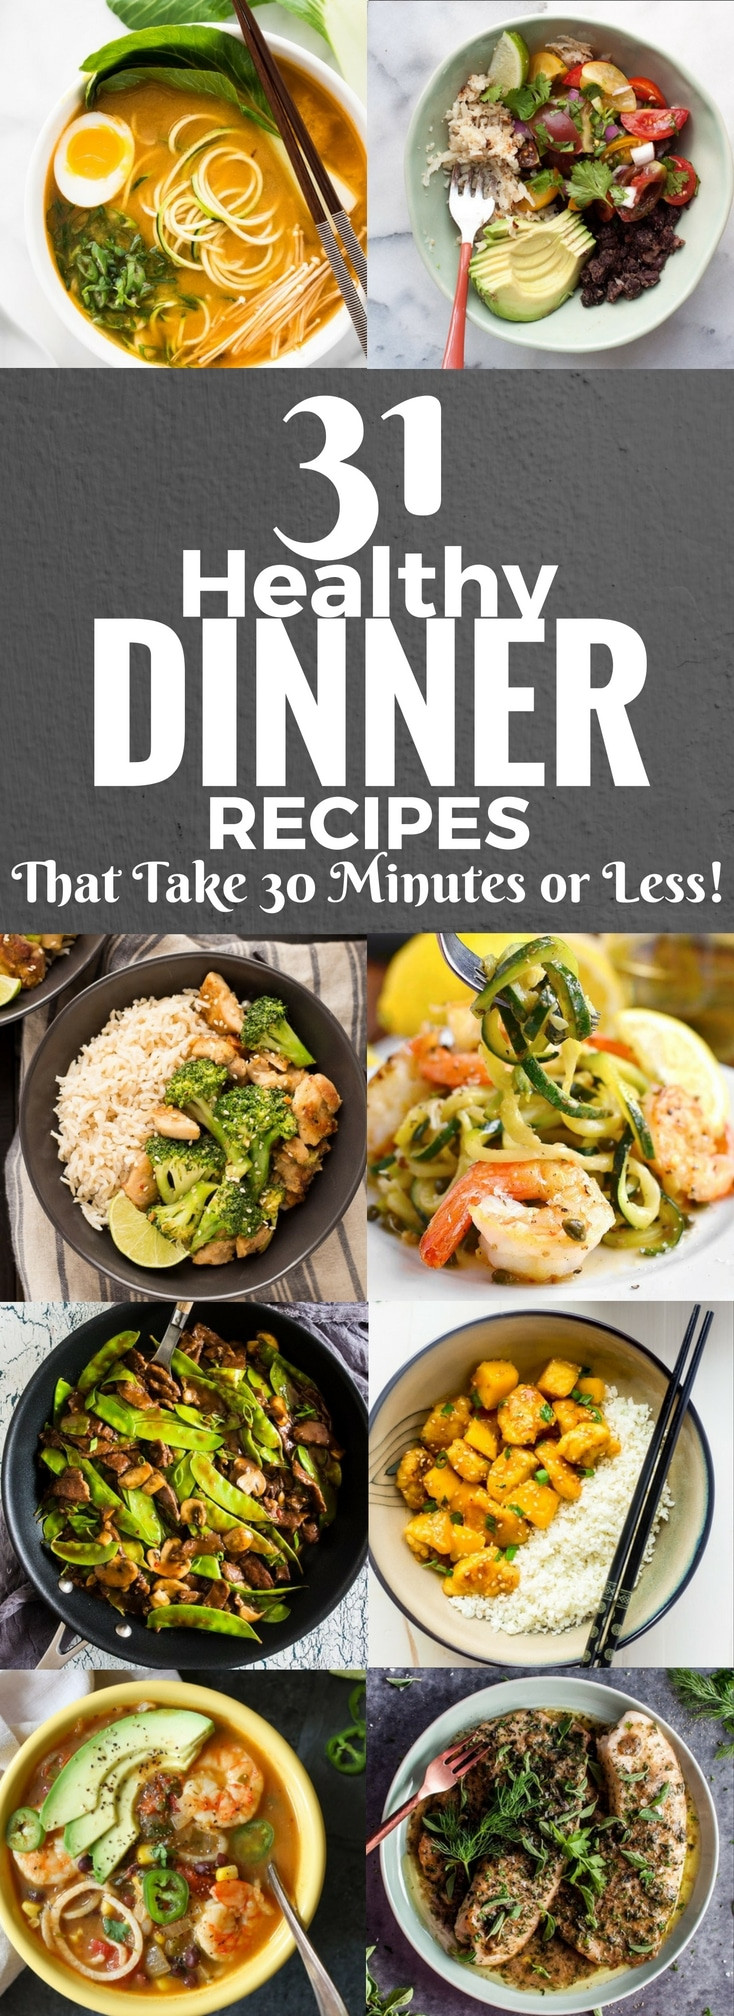 Pinterest Healthy Dinners
 31 Healthy Dinner Recipes That Take 30 Minutes or Less